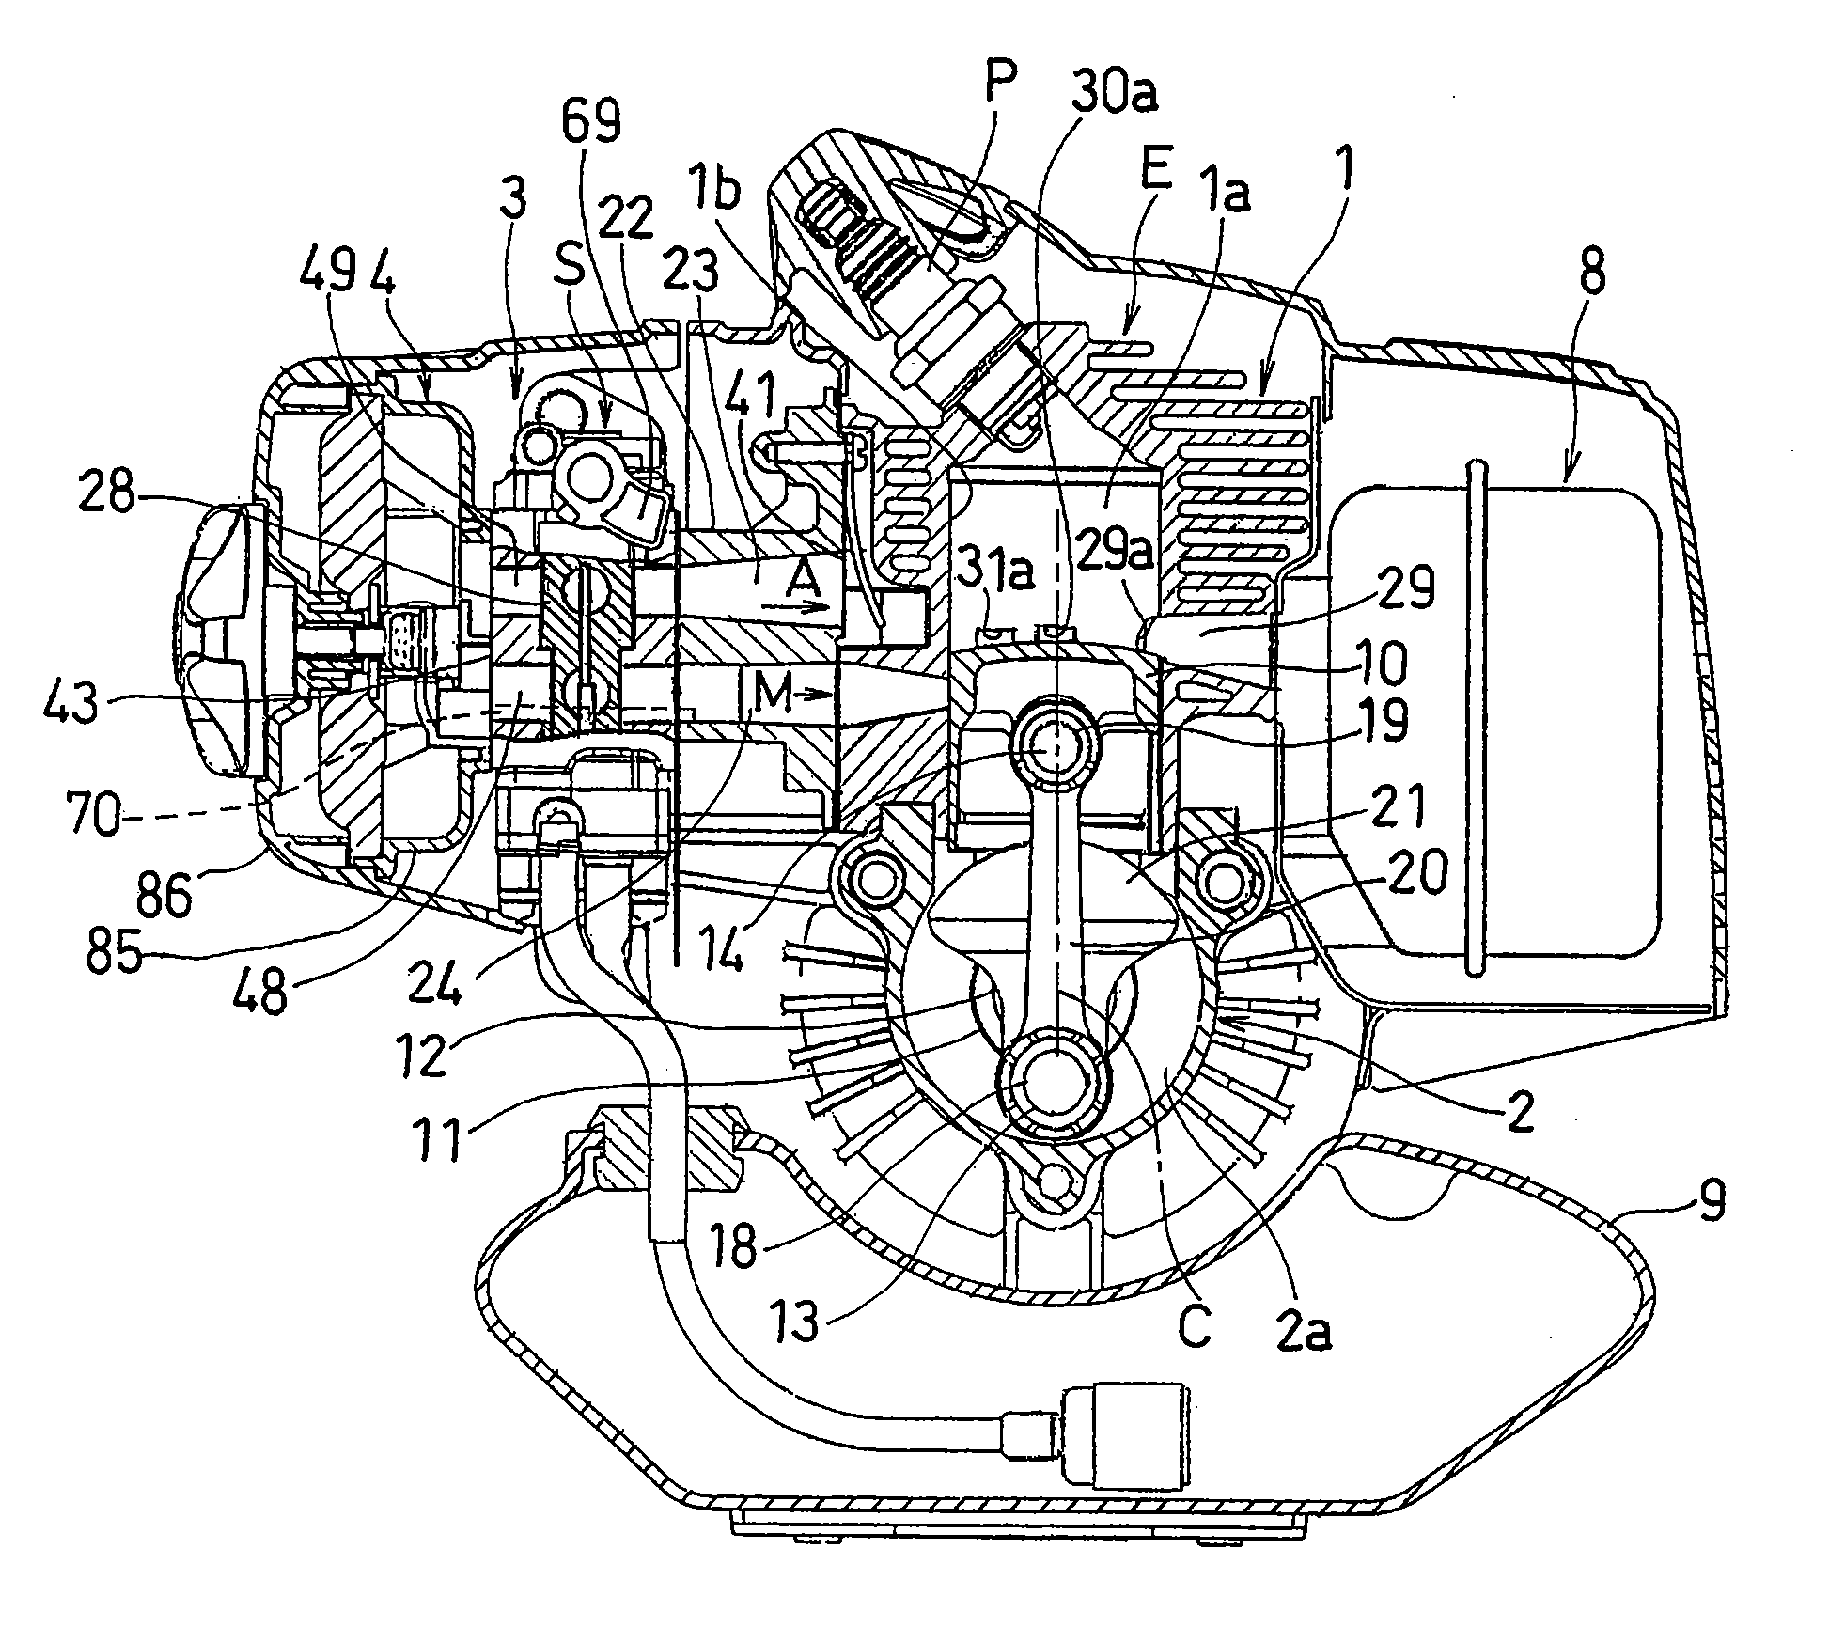 Two-stroke cycle combustion engine of air scavenging type